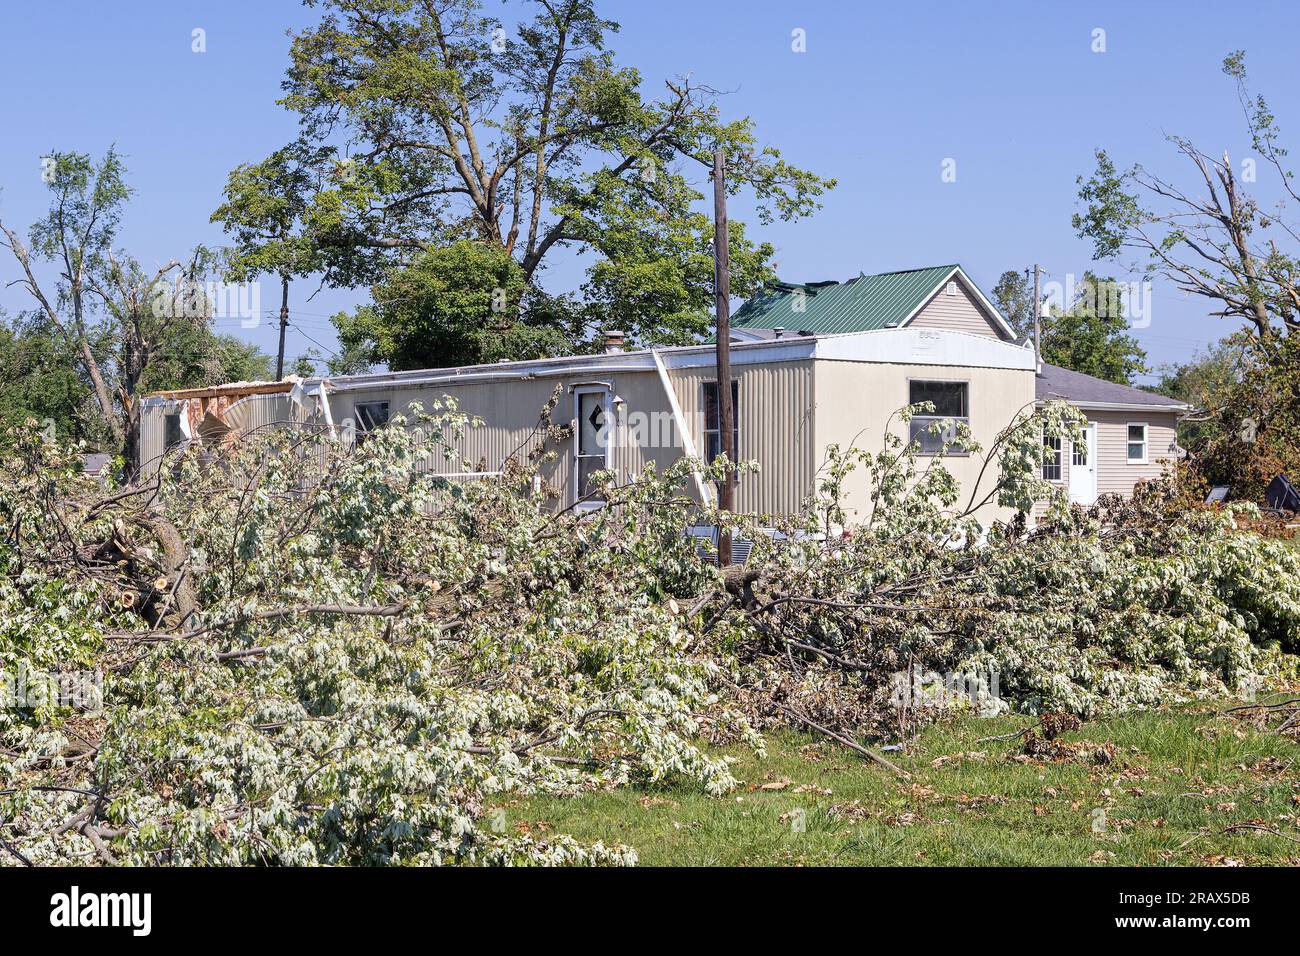 During the 4th of July holiday in La Harpe, Illinois, residents cleaned up the extensive damage done by a derecho storm that struck the area on 29th J Stock Photo